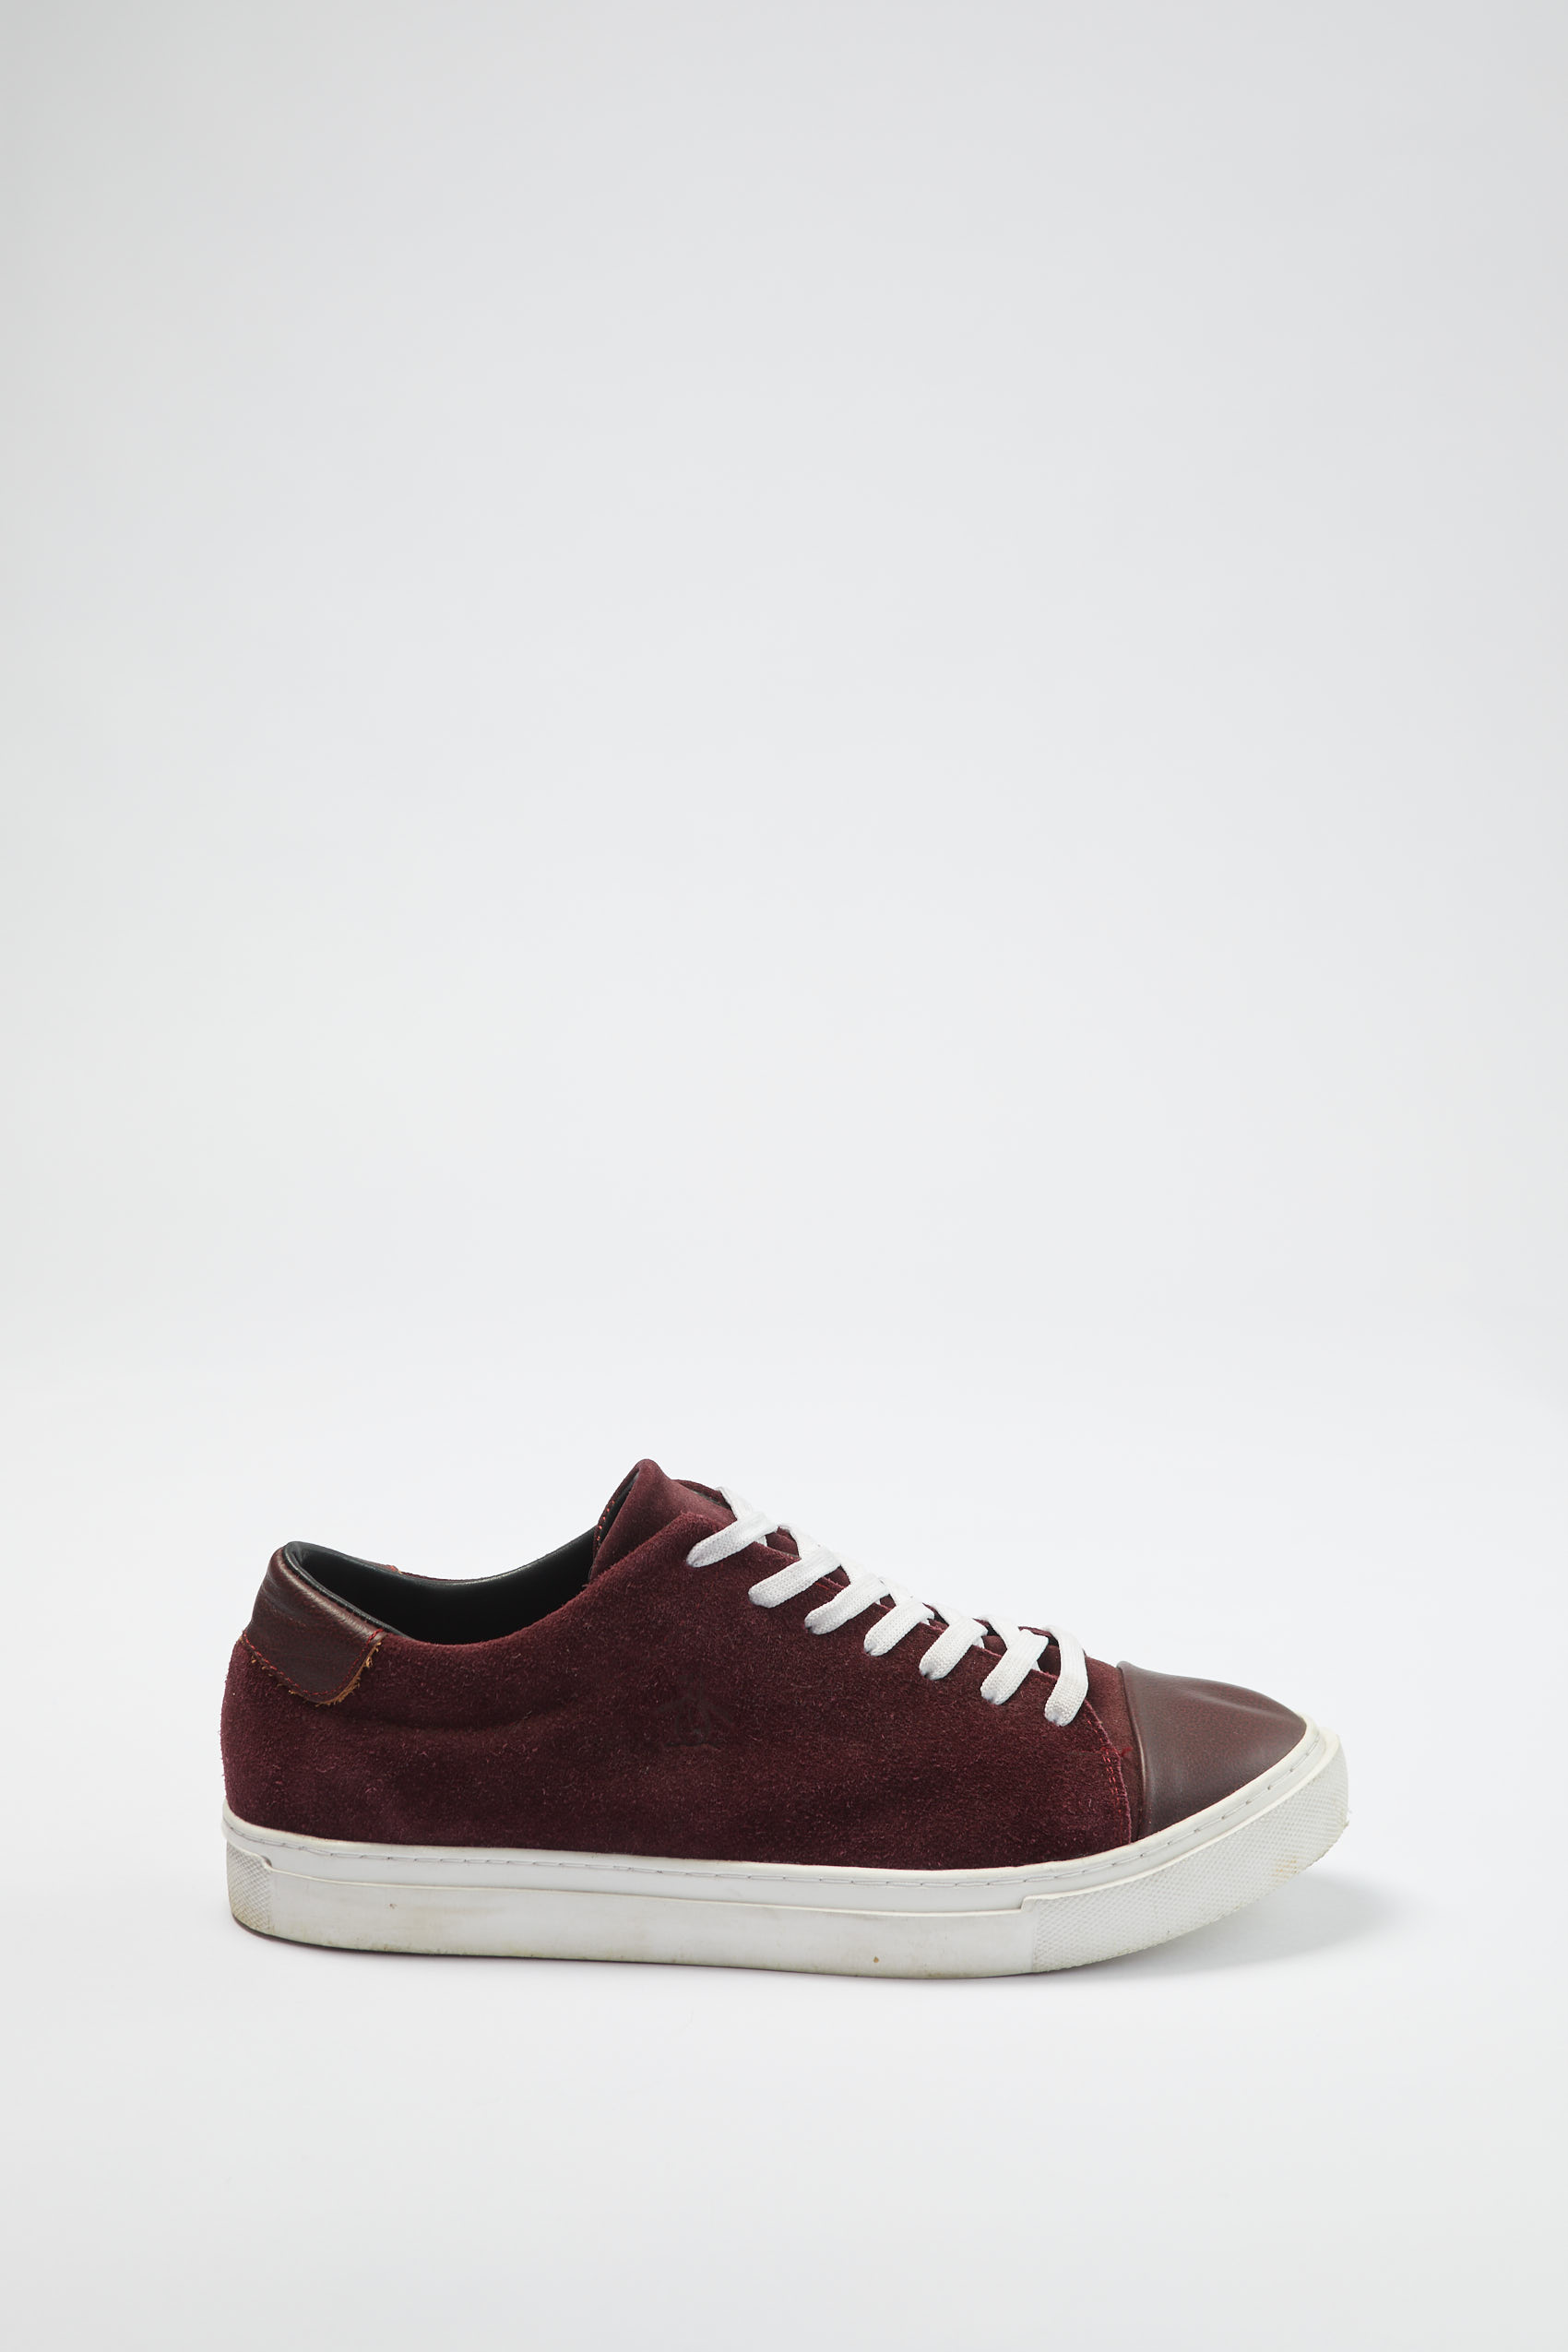 penguin_suede-sneakers_39-30-2022__picture-27084